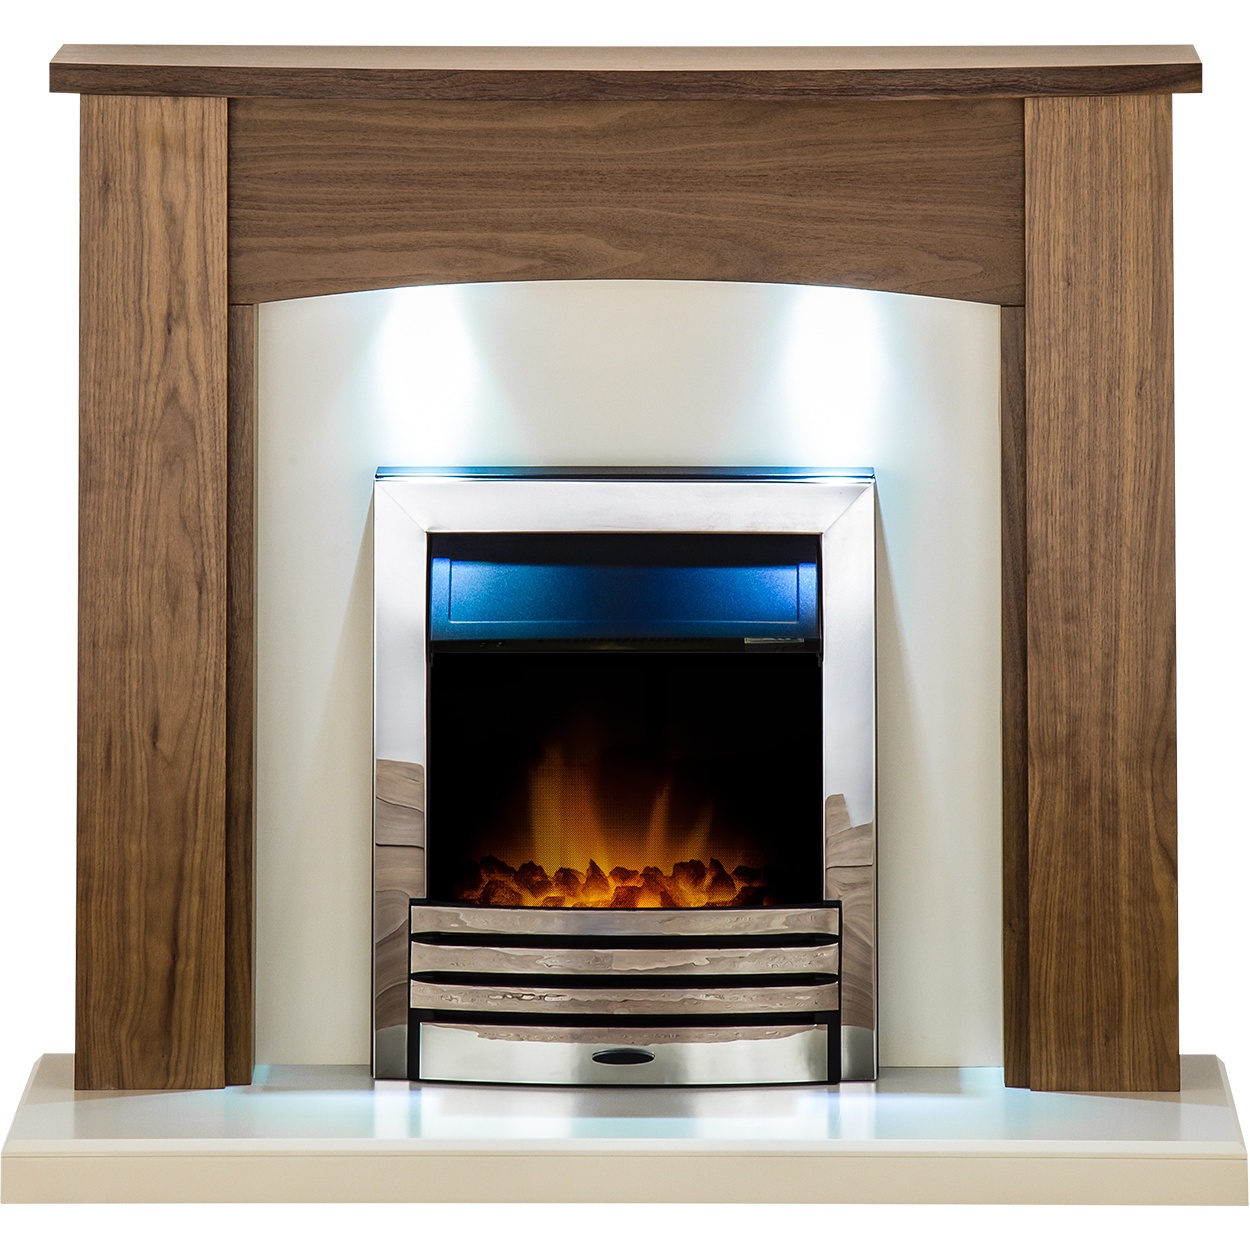 Fireplace Items New Details About Adam Fireplace Suite Walnut & Eclipse Electric Fire Chrome and Downlights 48"